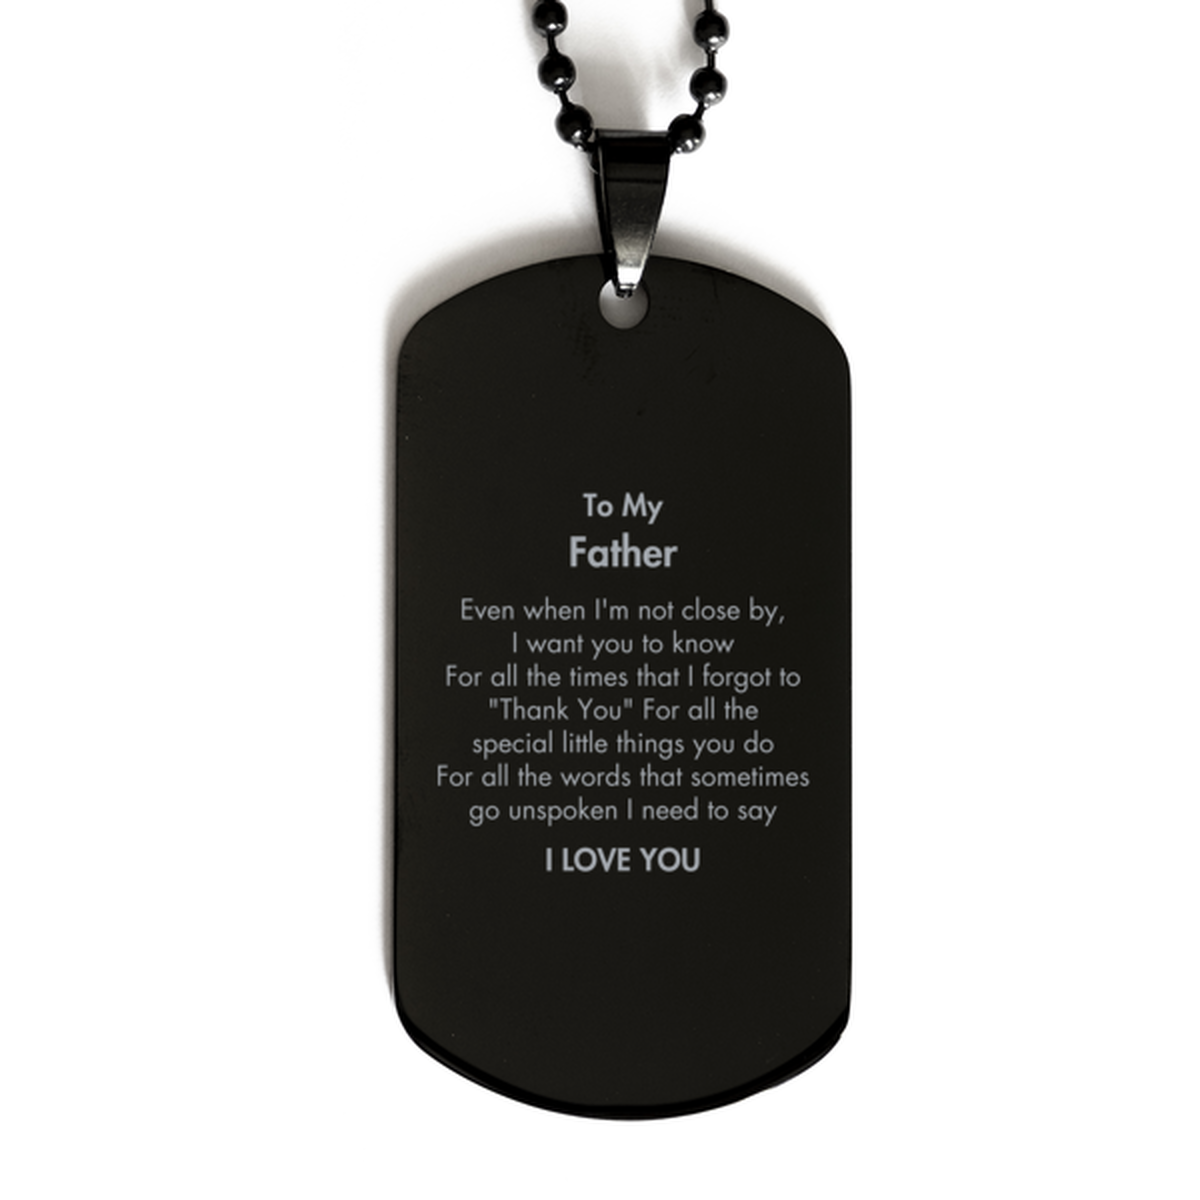 Thank You Gifts for Father, Keepsake Black Dog Tag Gifts for Father Birthday Mother's day Father's Day Father For all the words That sometimes go unspoken I need to say I LOVE YOU